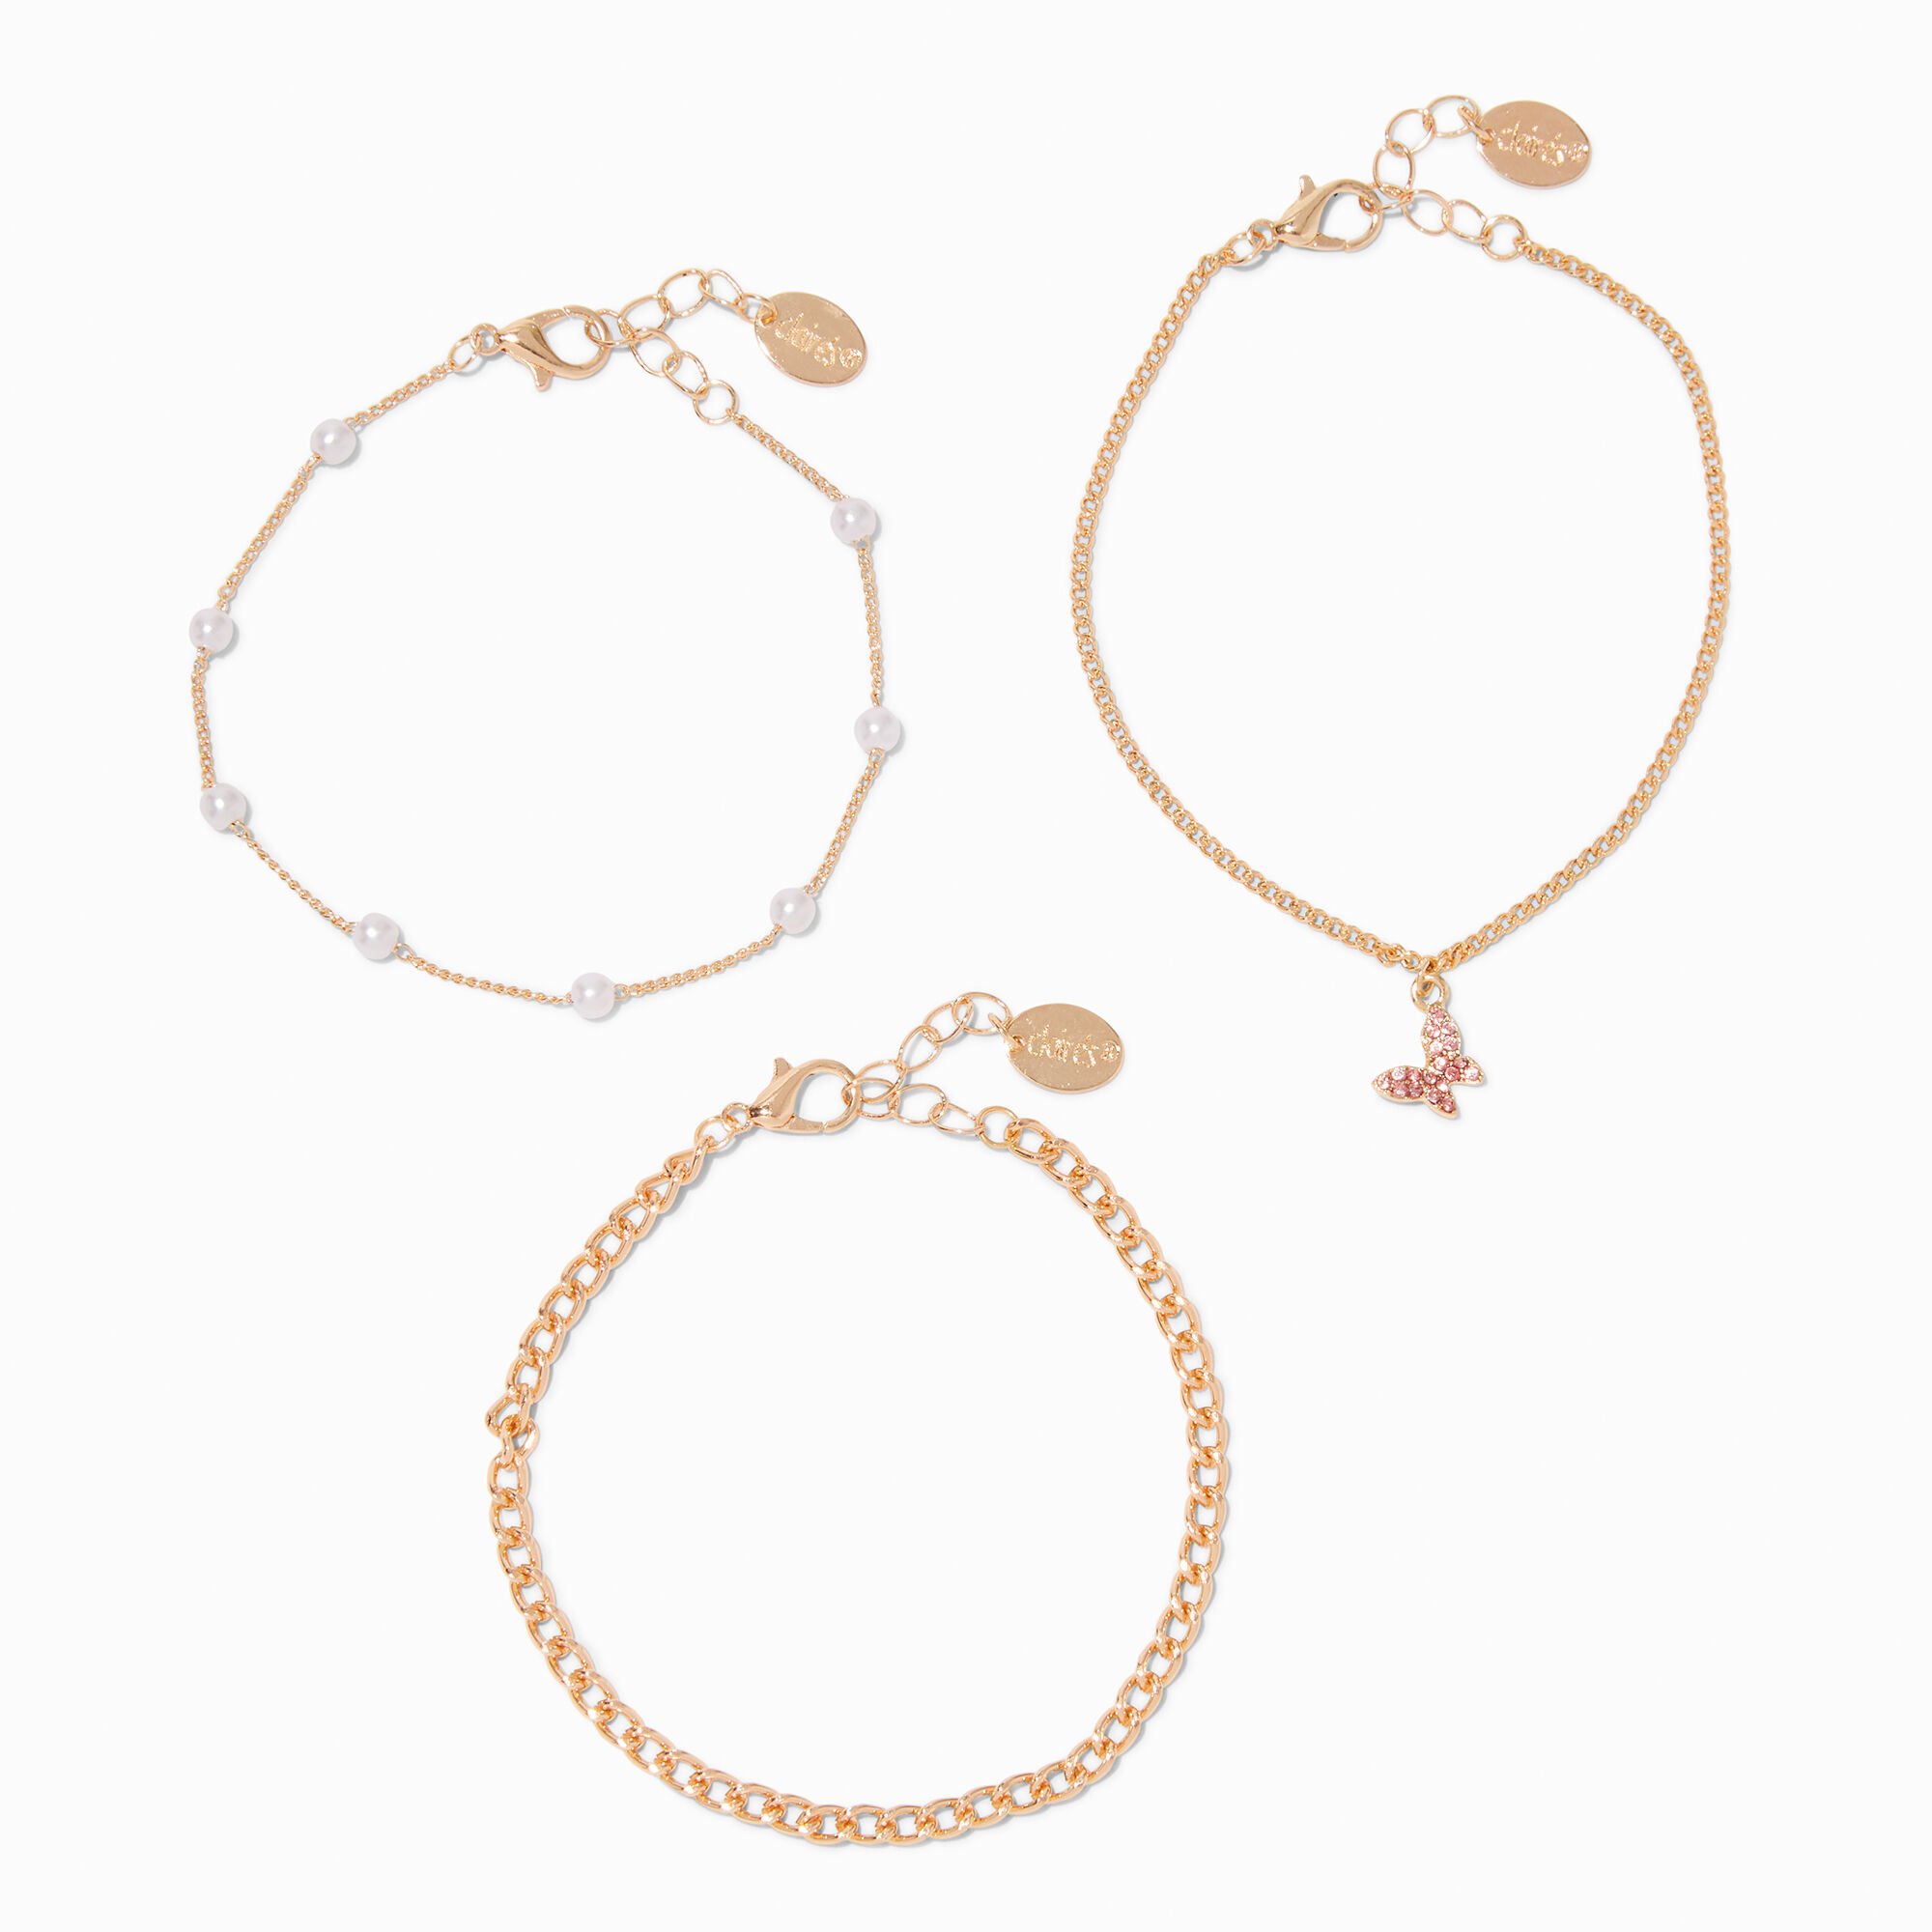 View Claires GoldTone Butterfly Pearl Bracelet Set 3 Pack Pink information